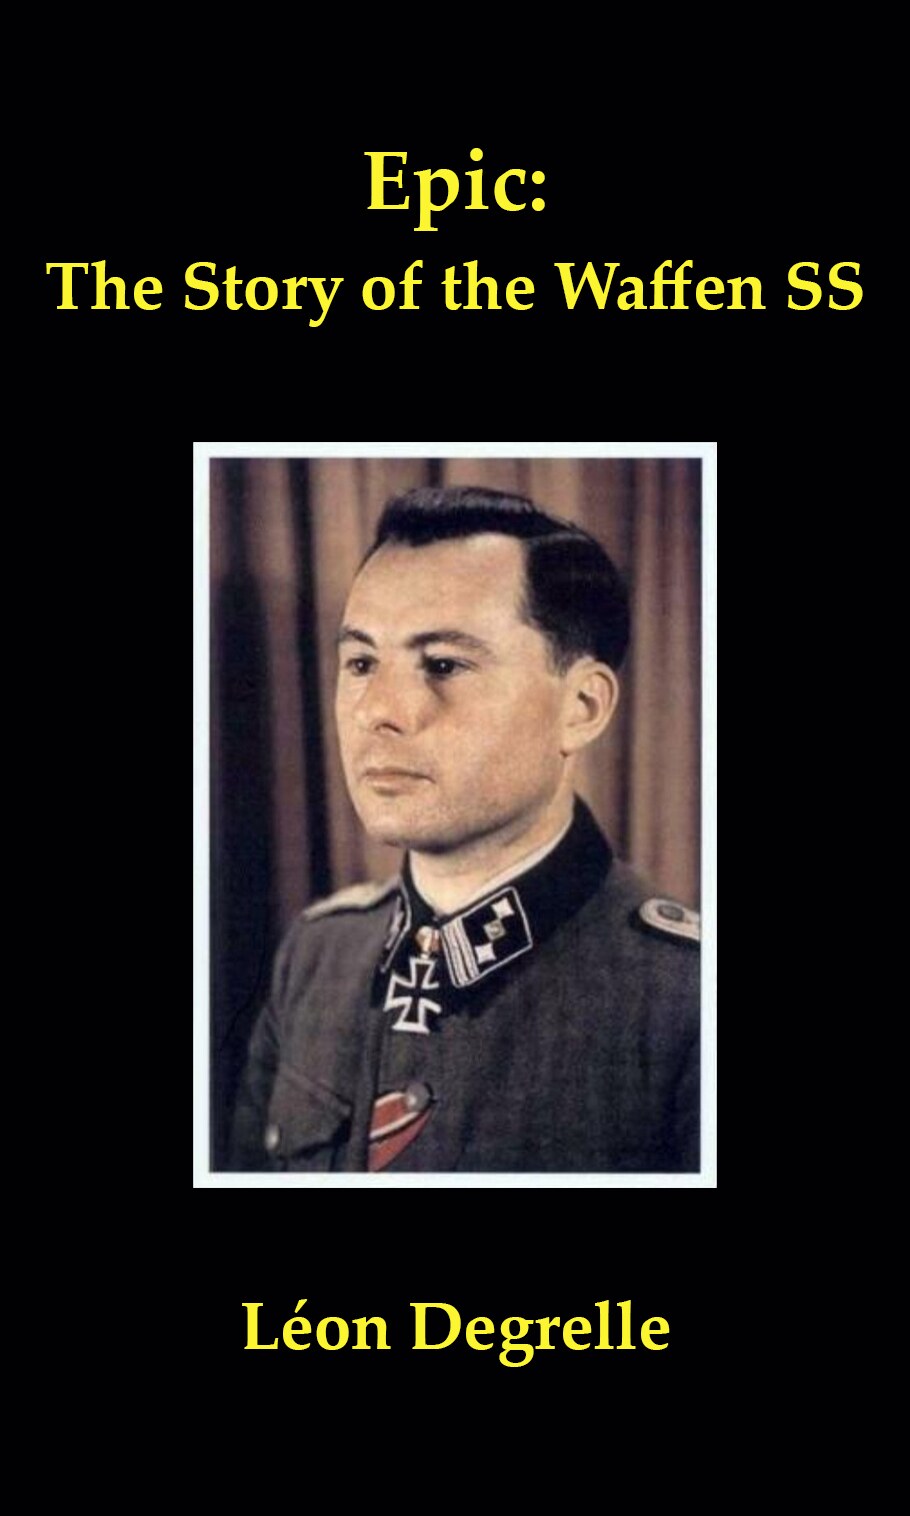 Epic: The story of the Waffen SS